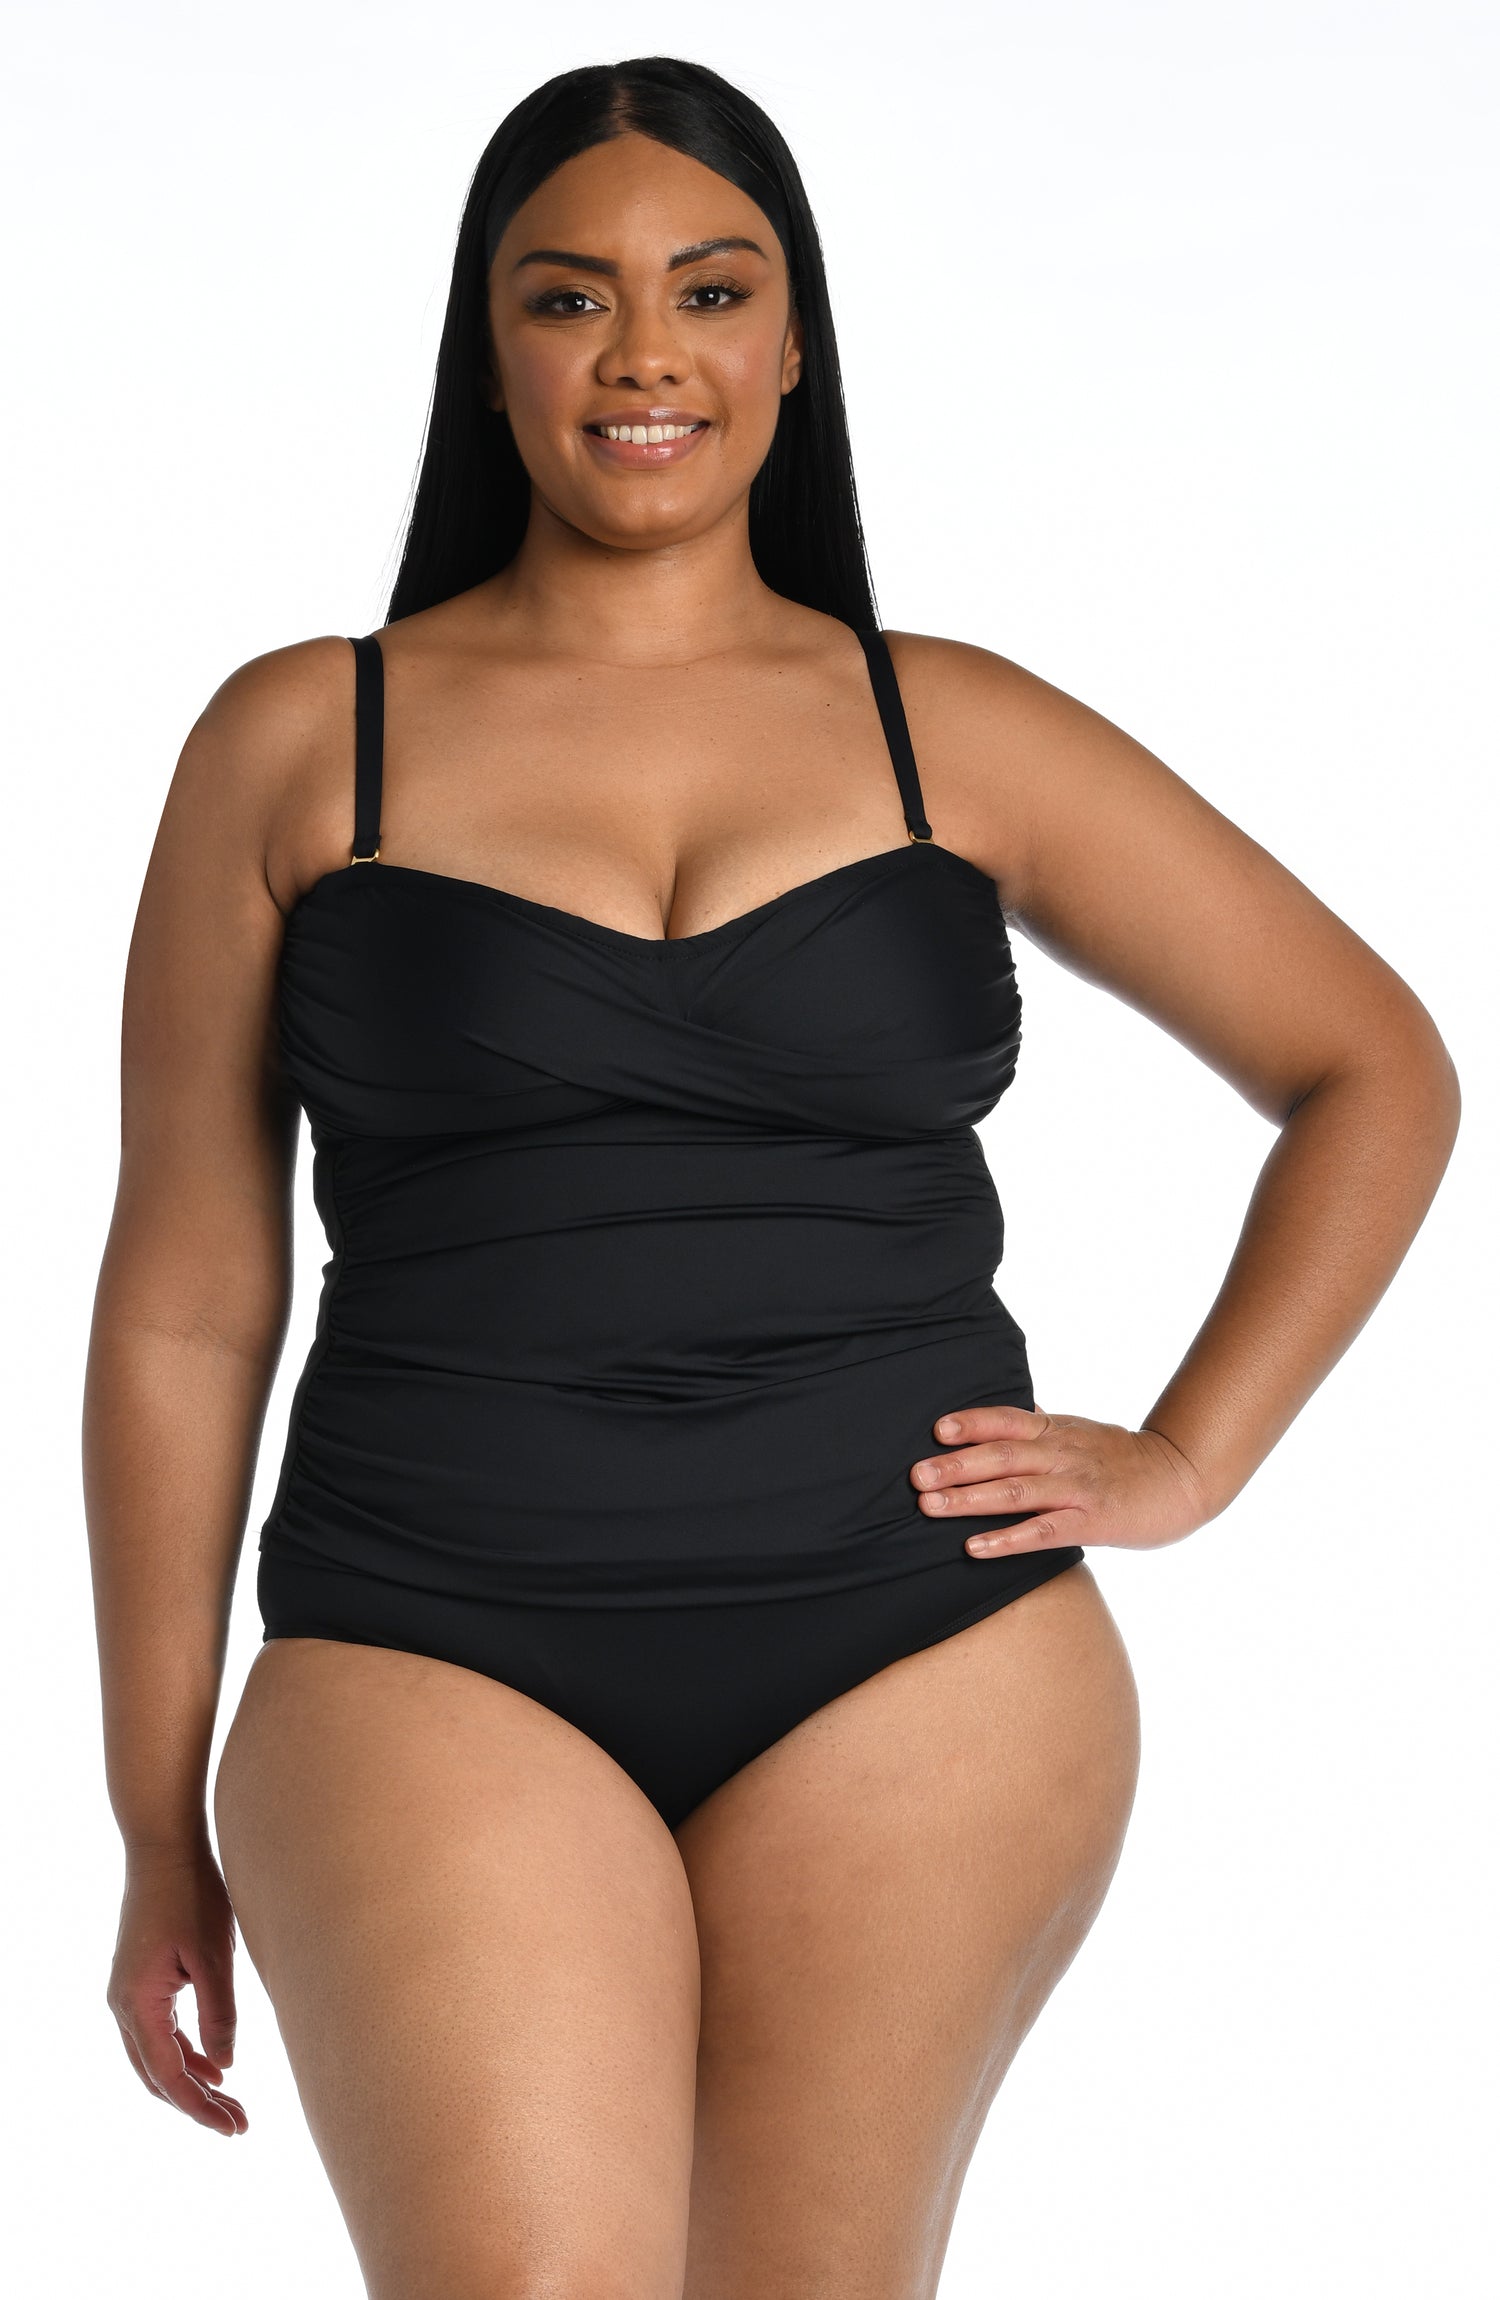 Model is wearing a black bandeau tankini swimsuit top from our Best-Selling Island Goddess collection.